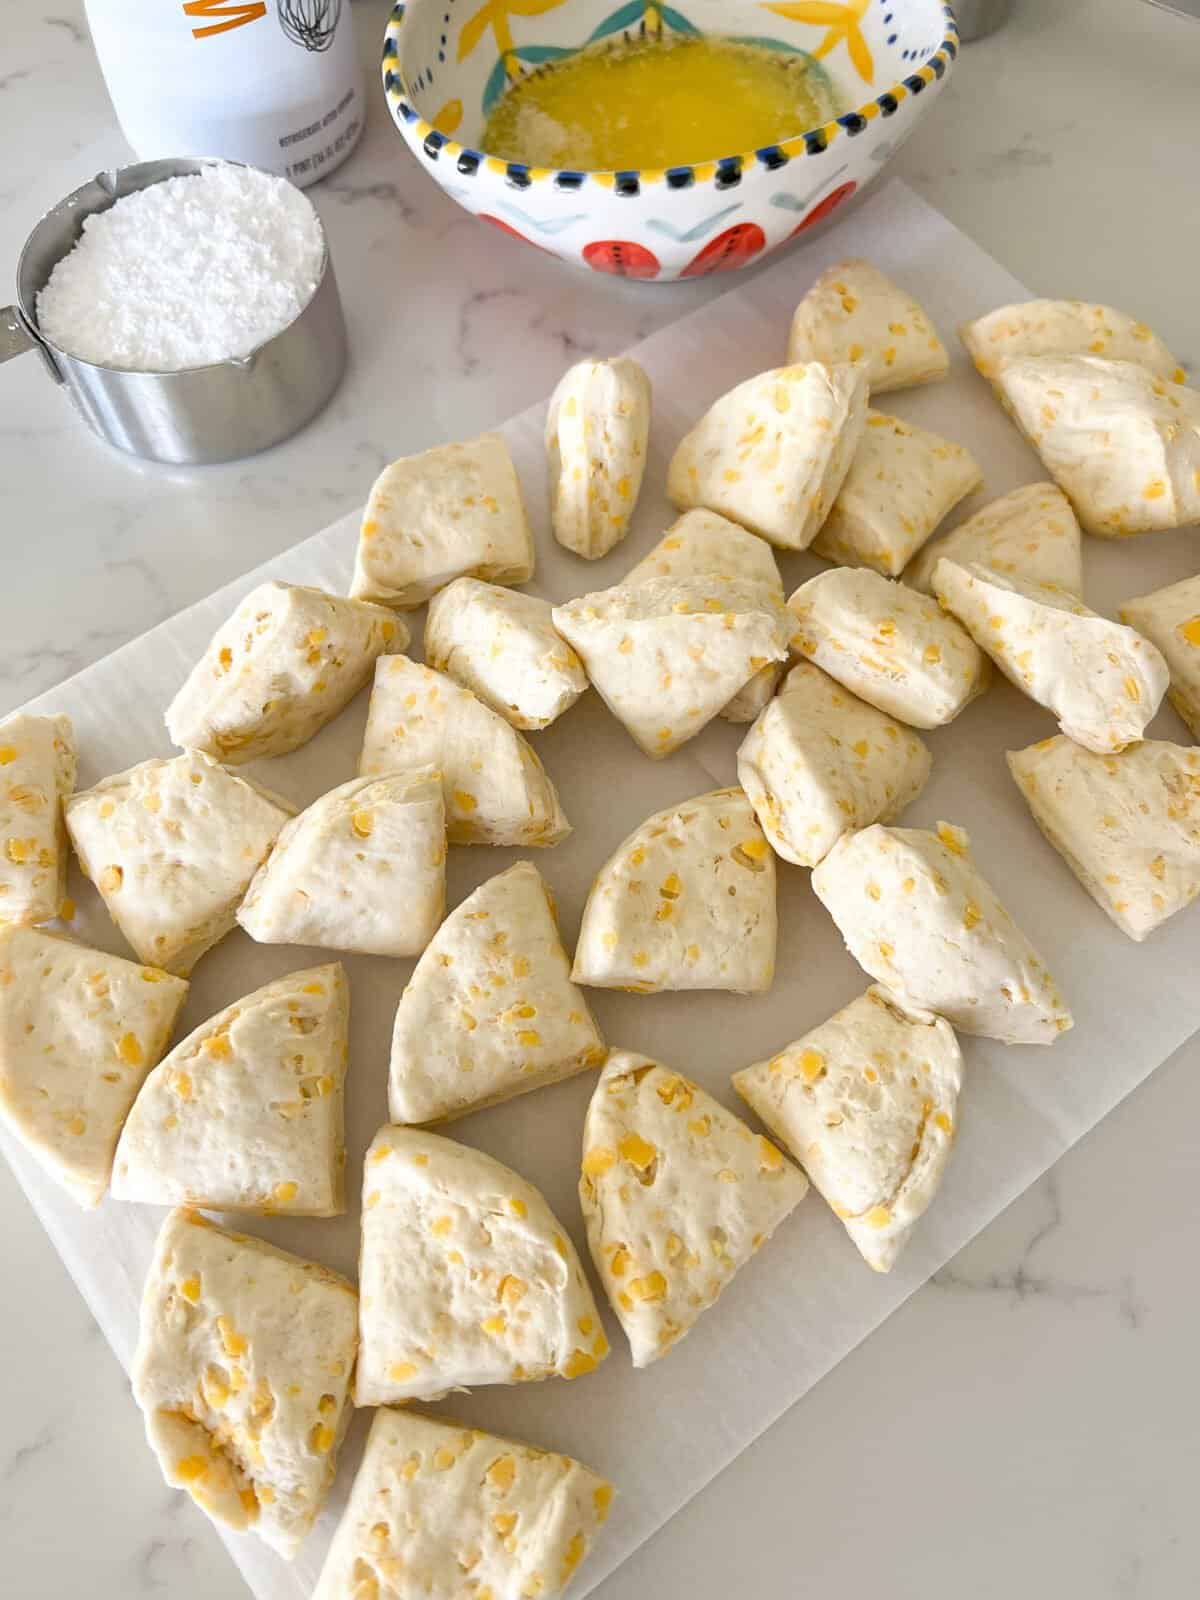 biscuits cut into fourths on parchment paper